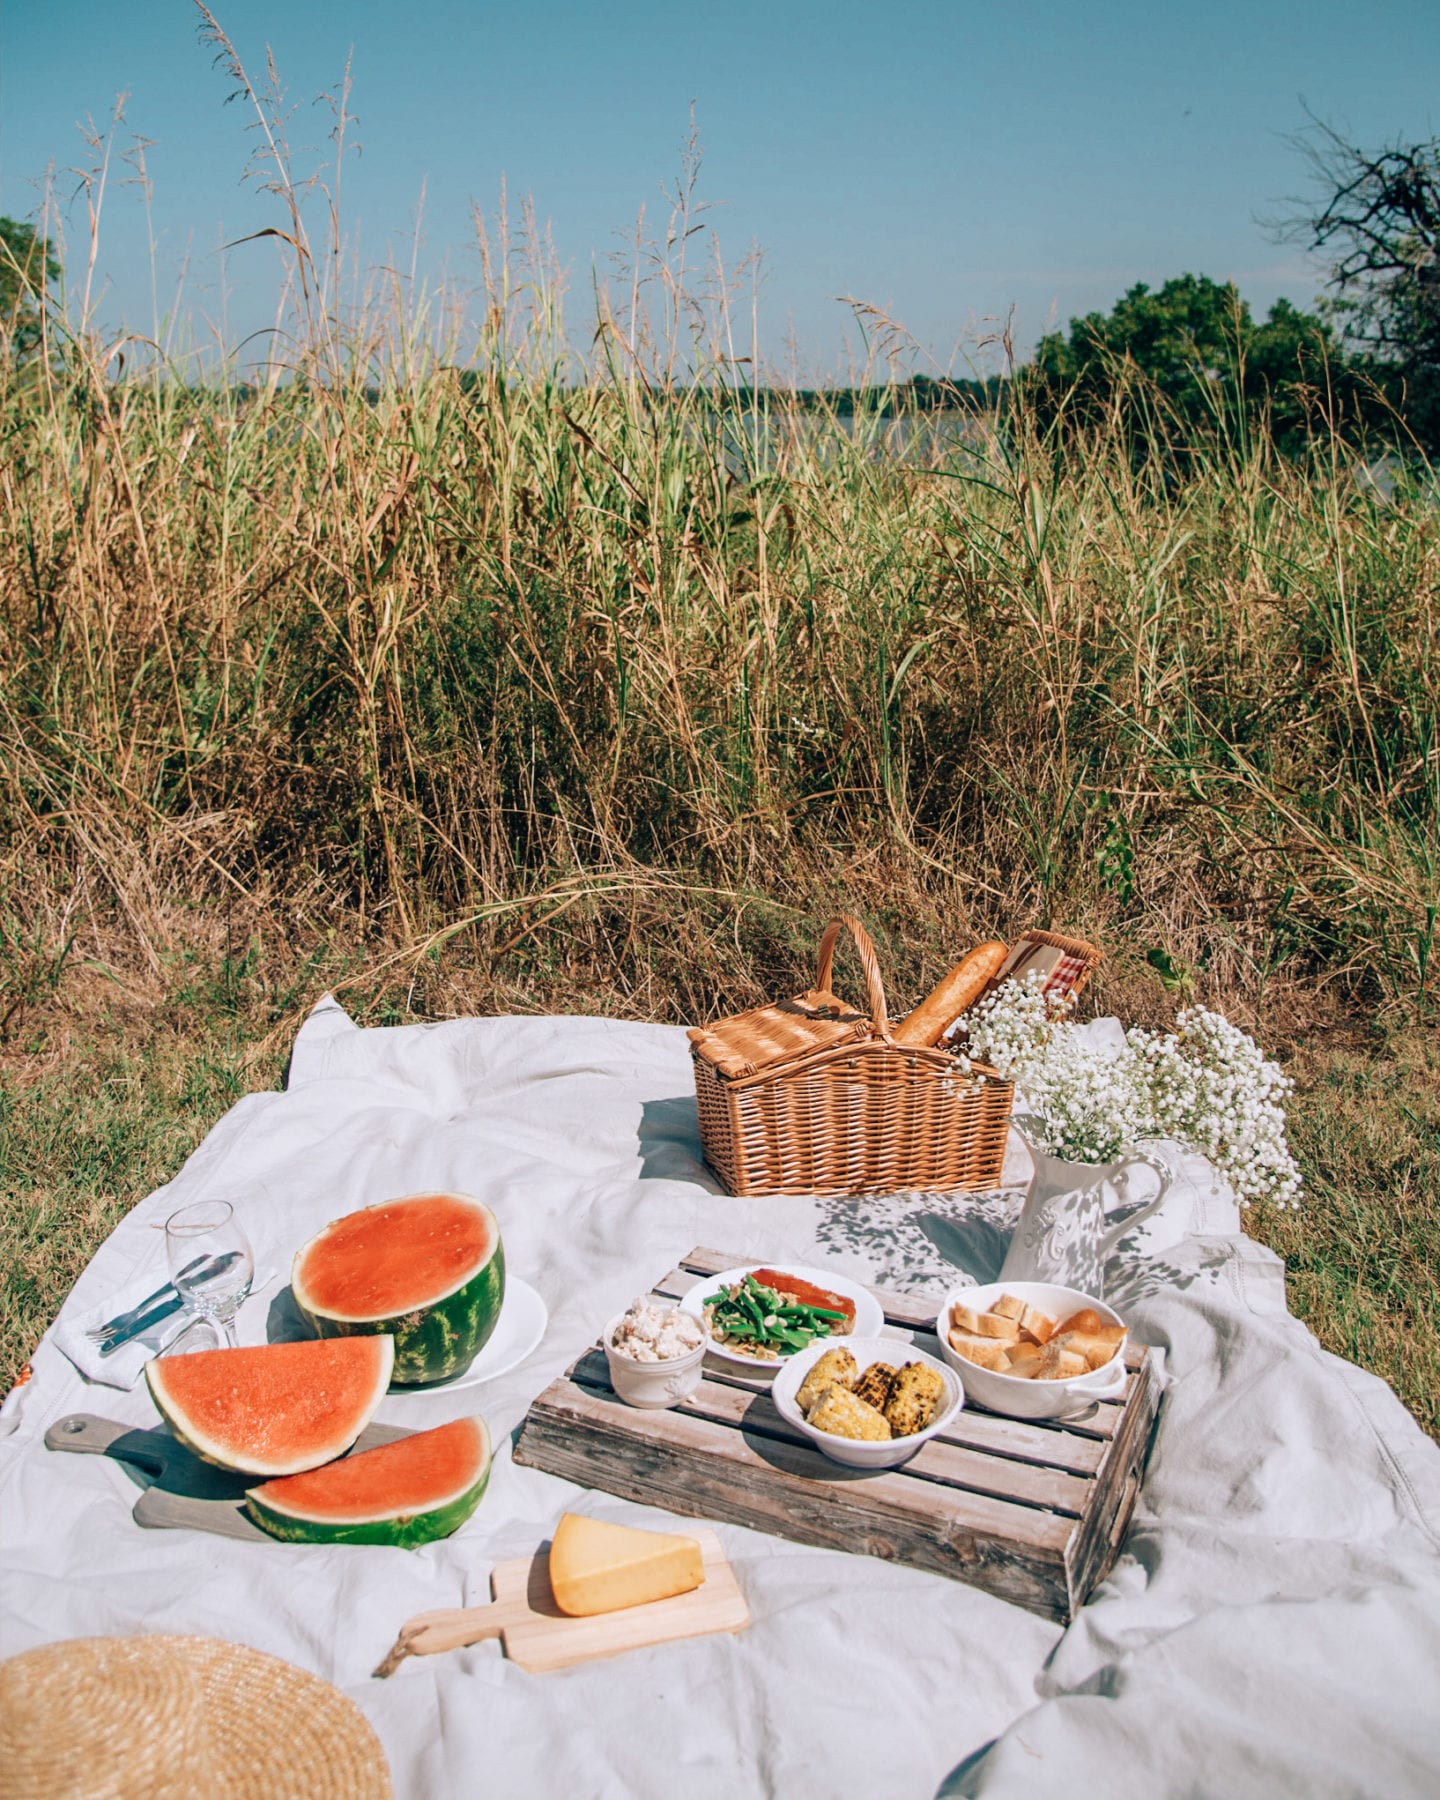 Pack A Perfect Picnic with These 5 Tips!